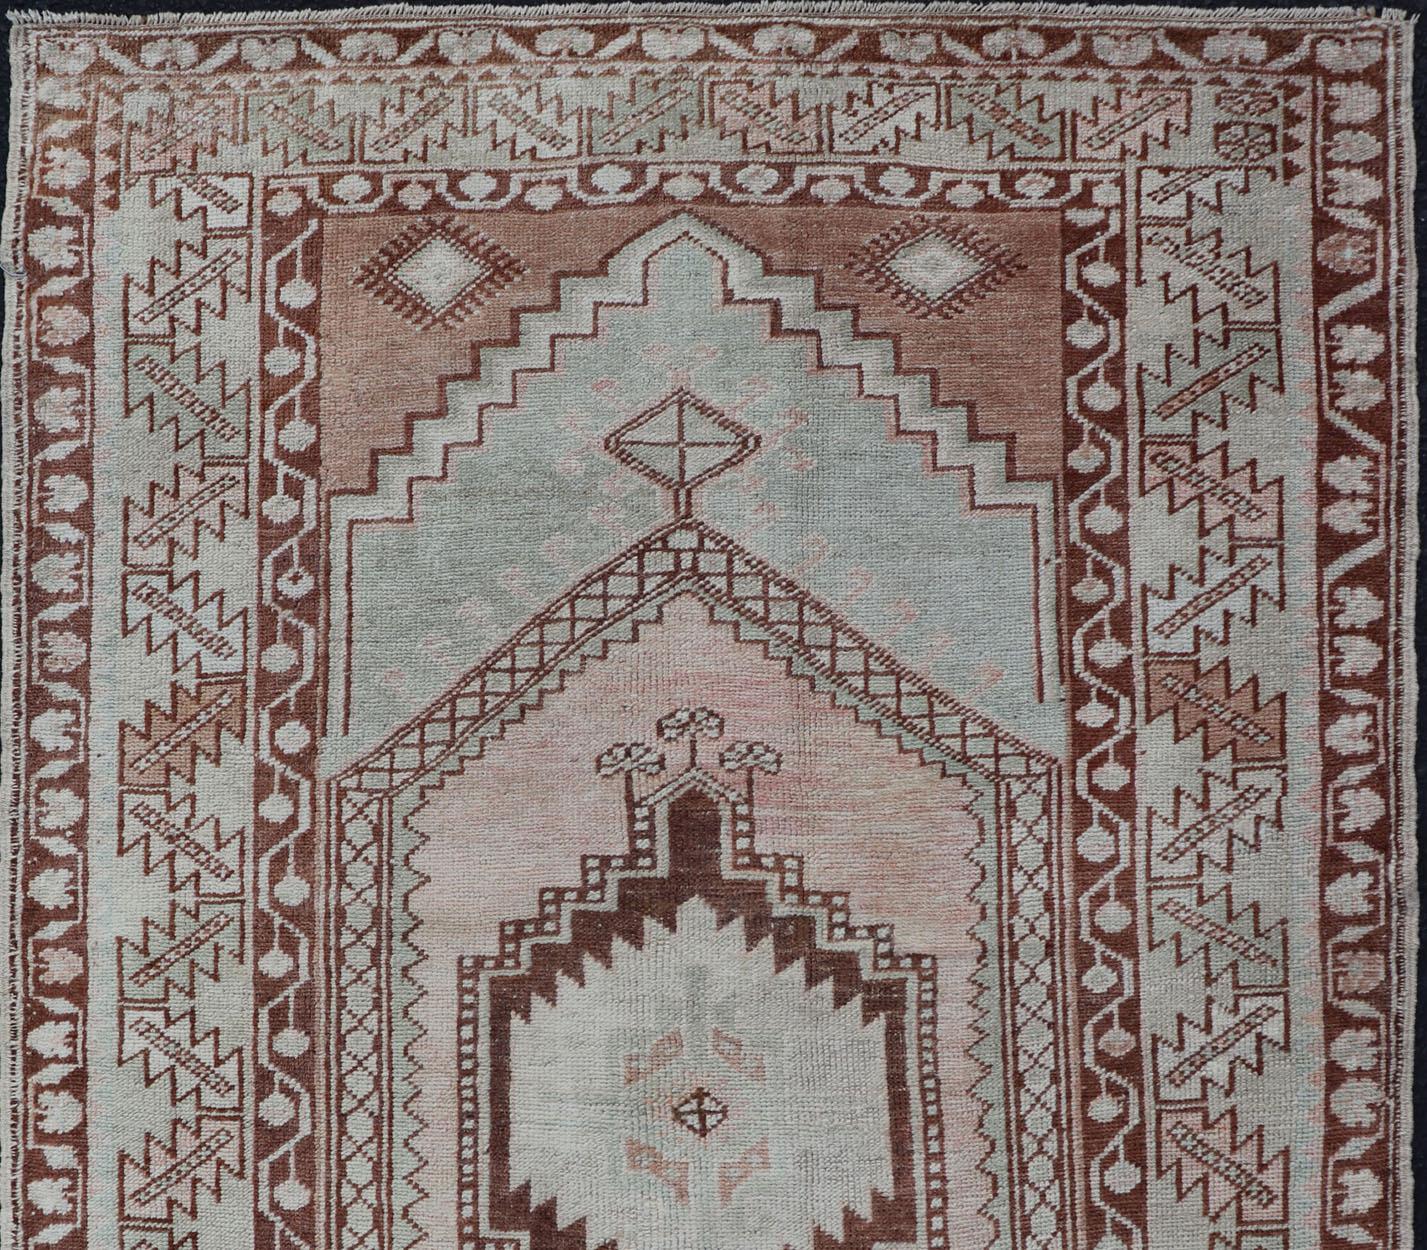 Muted color antique Turkish Oushak carpet with traditional floral medallion design, rug EN-178029, country of origin / type: Turkey / Oushak, circa 1940

This striking Turkish Oushak rug bears a light blue colored along with brown, blush, salmon